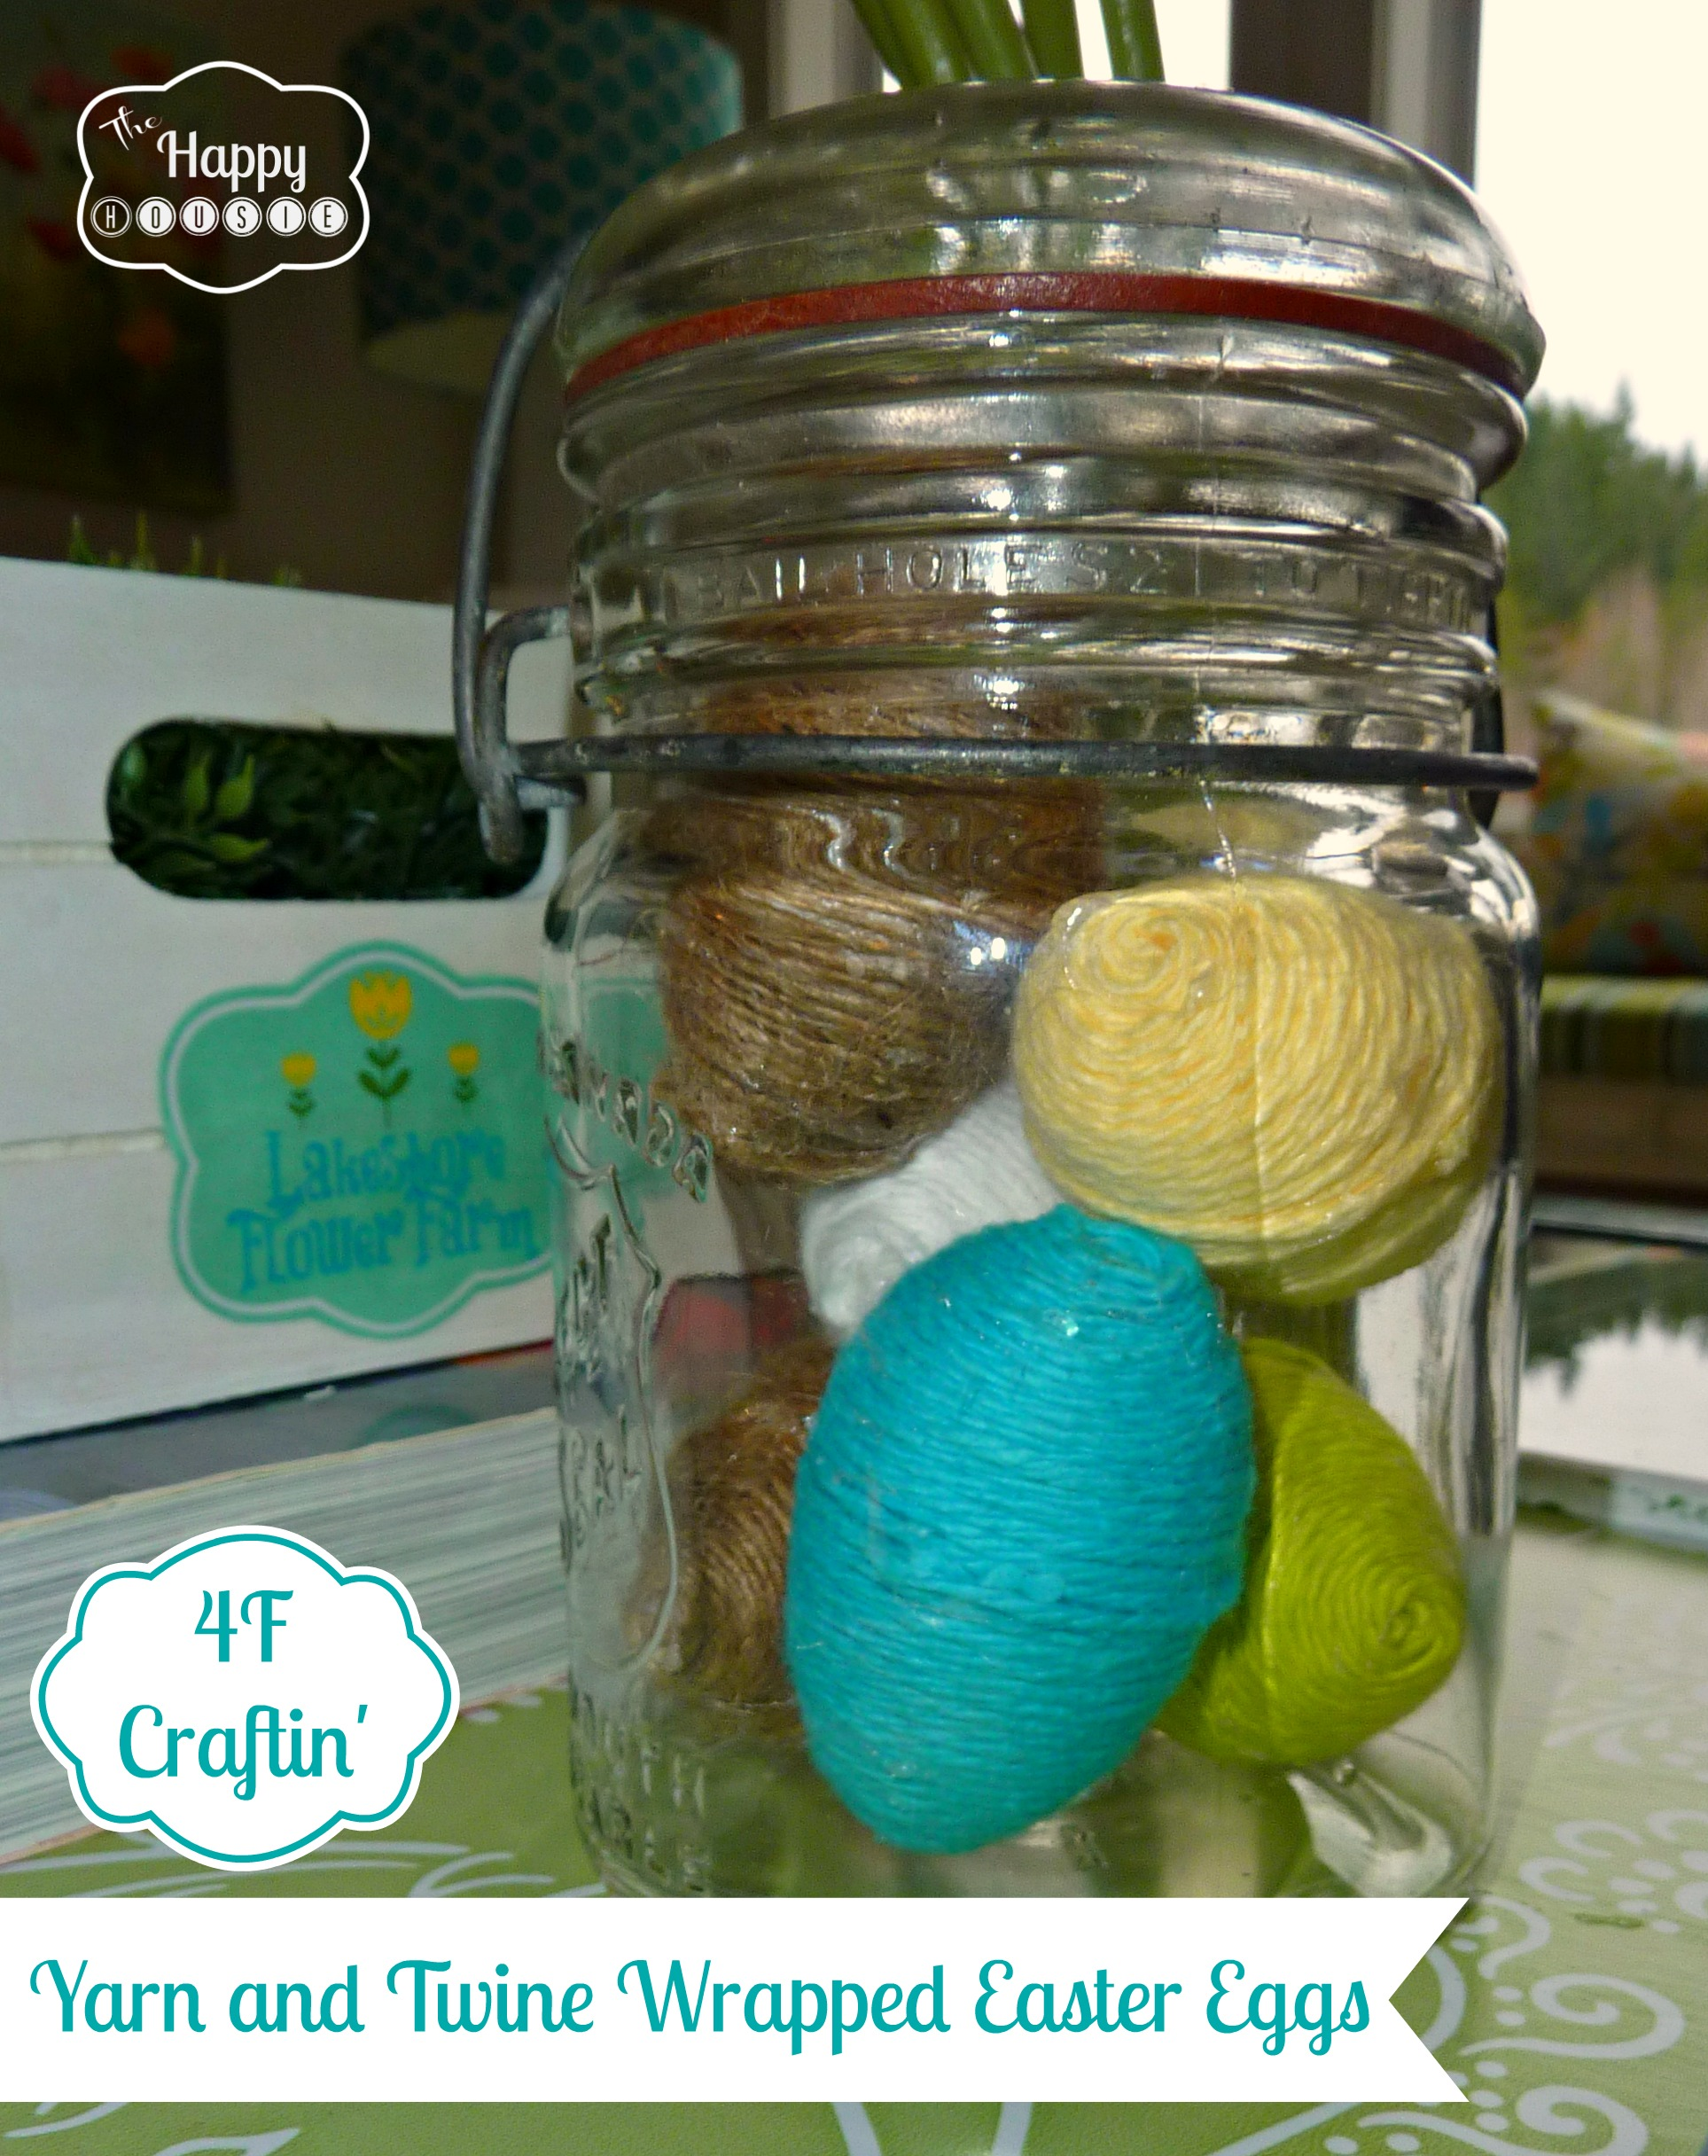 4F craftin yarn and twine wrapped easter eggs at thehappyhousie